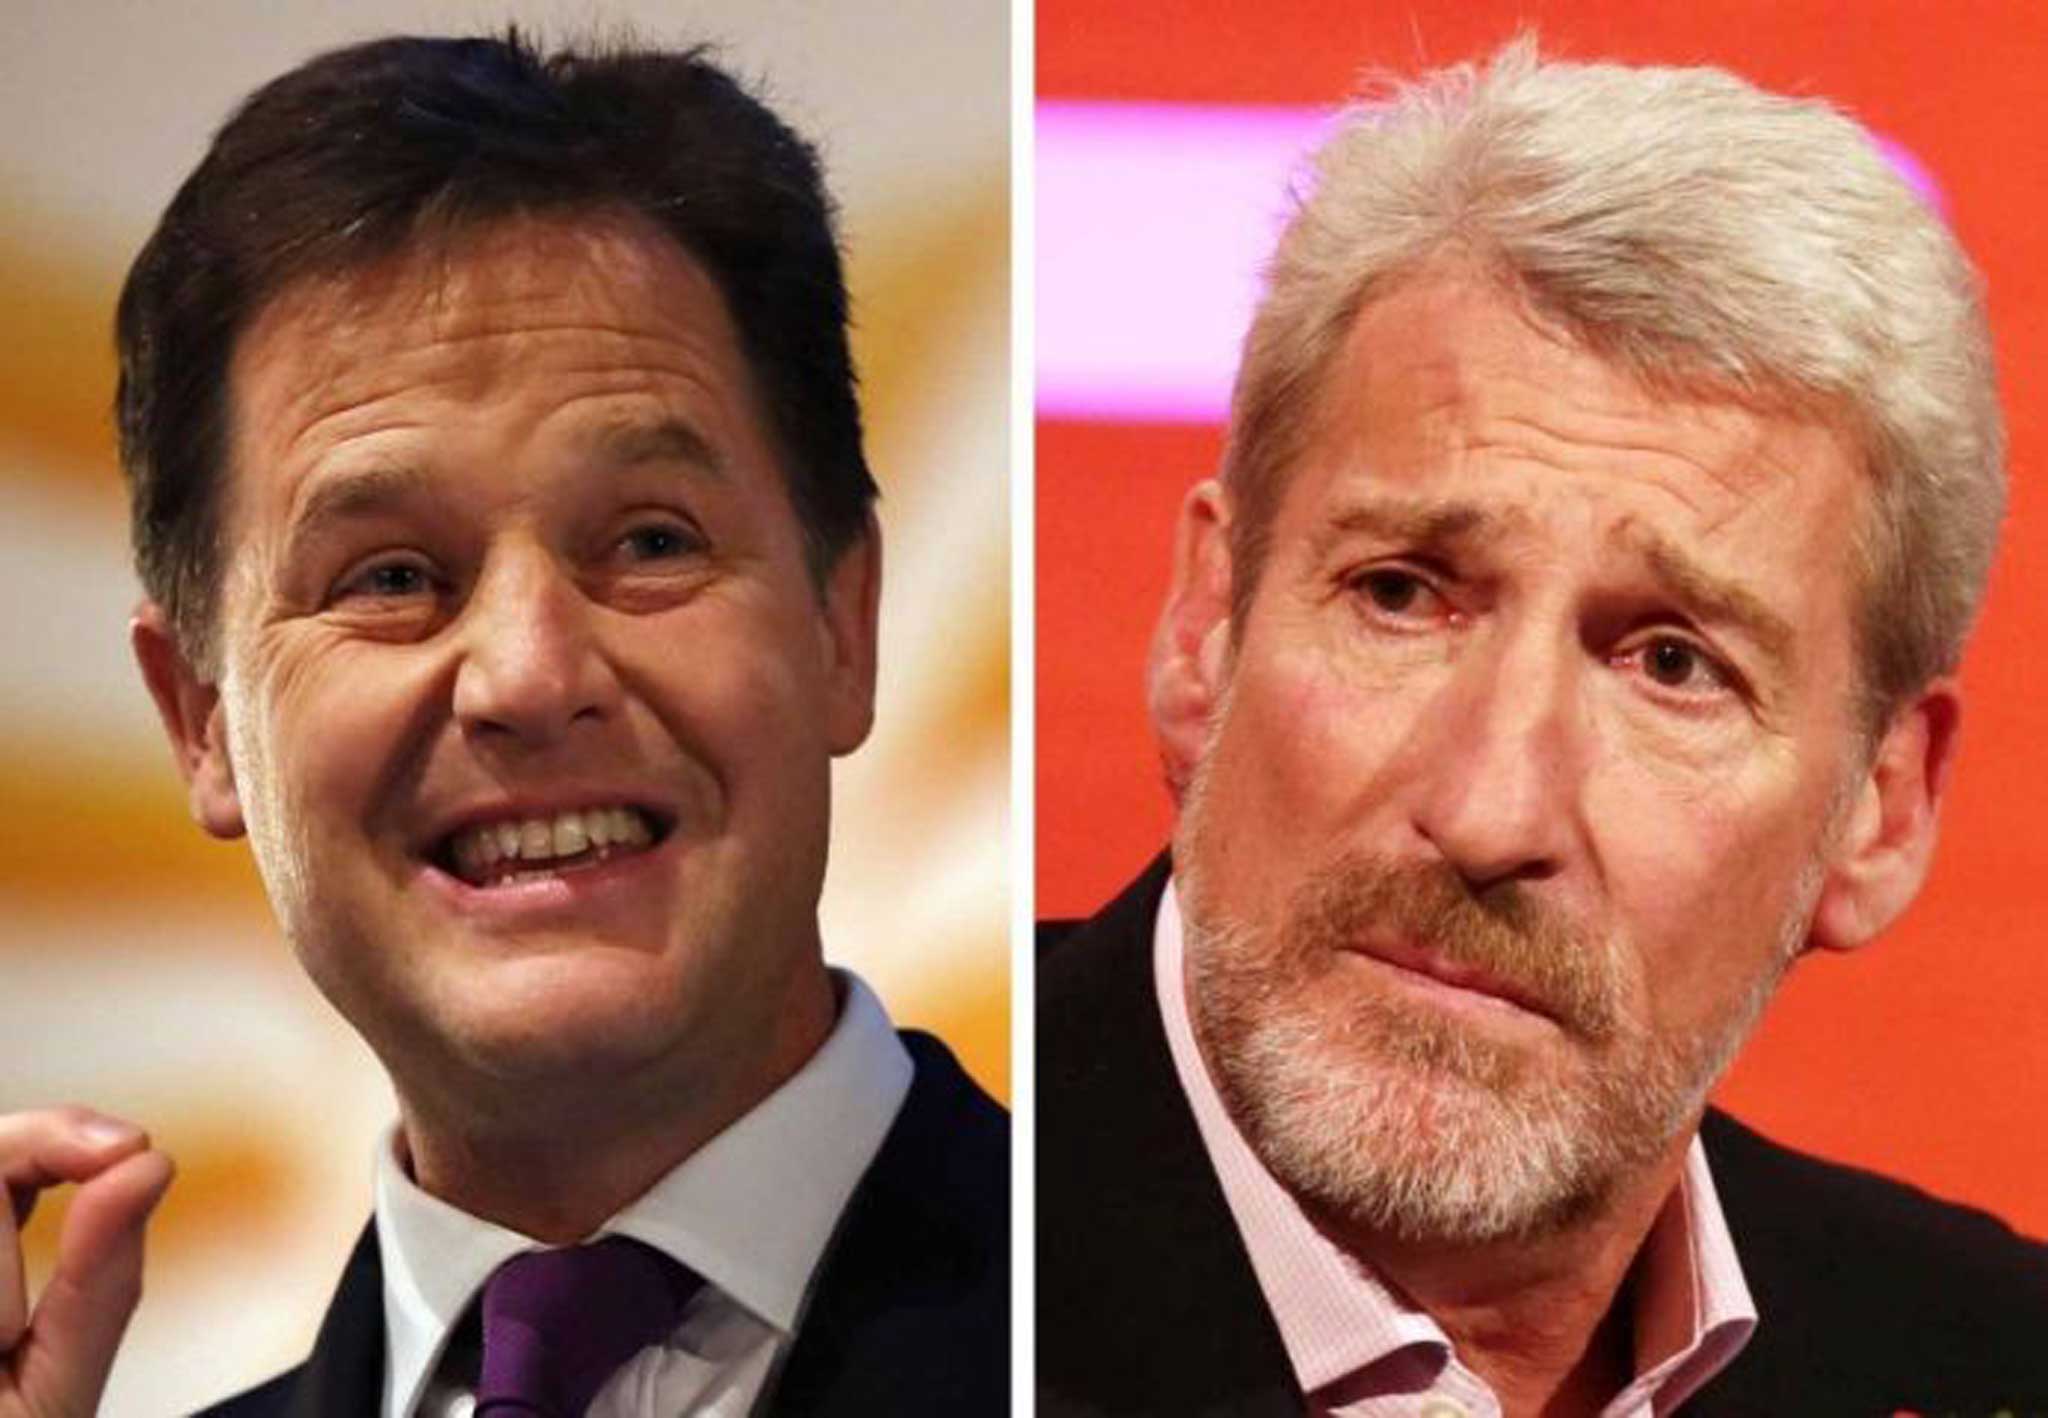 Jeremy Paxman's recent comments should not deter people from voting - even for Nick Clegg